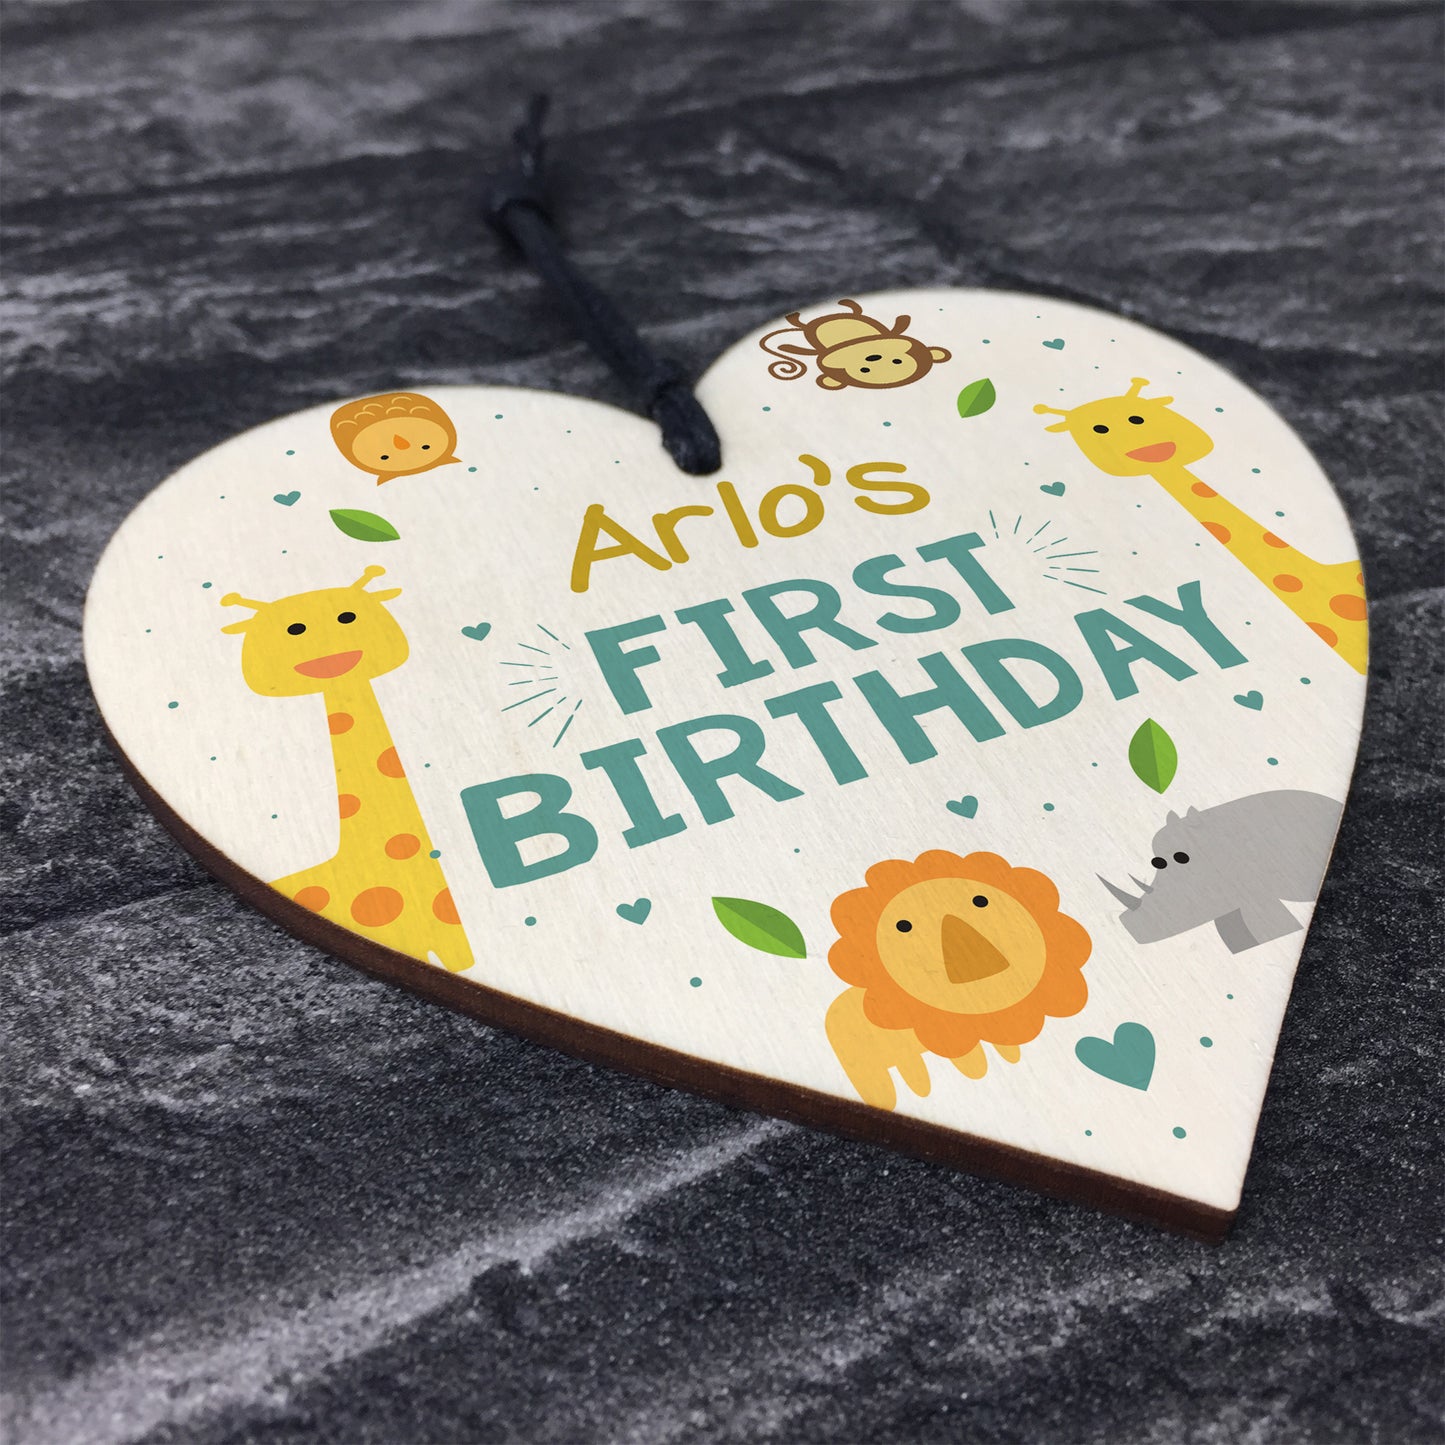 Personalised 1st Birthday Gift For Daughter Son Wooden Heart